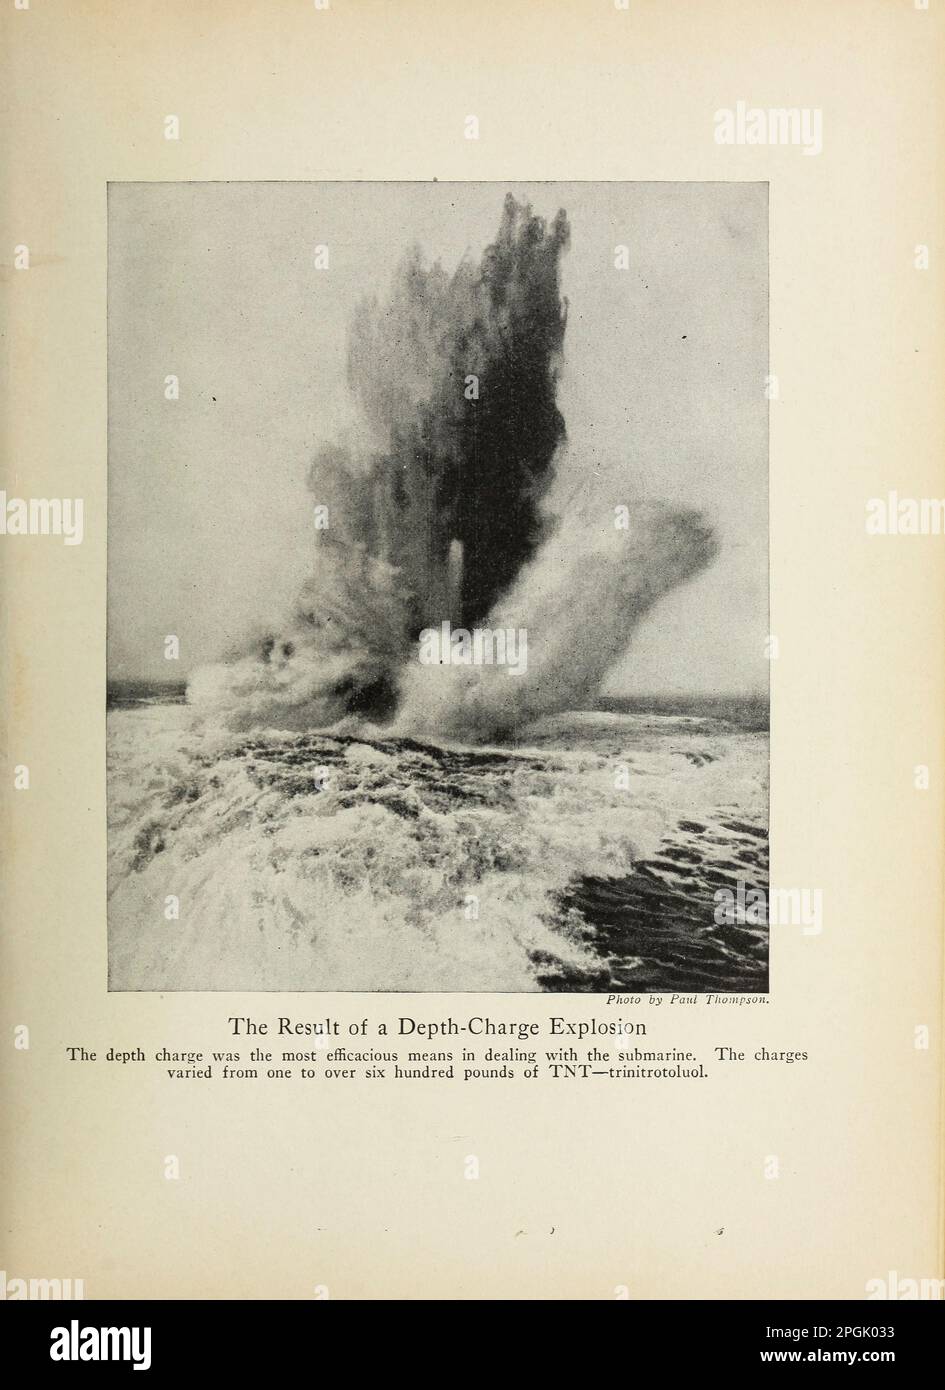 The Result of a Depth-Charge Explosion The depth charge was the most efficacious means in dealing with the submarine. The charges varied from one to over six hundred pounds of TNT - trinitrotoluol. from the book ' Deeds of heroism and bravery : the book of heroes and personal daring ' by Elwyn Alfred Barron and Rupert Hughes,  Publication Date 1920 Publisher New York : Harper & Brothers Publishers Stock Photo